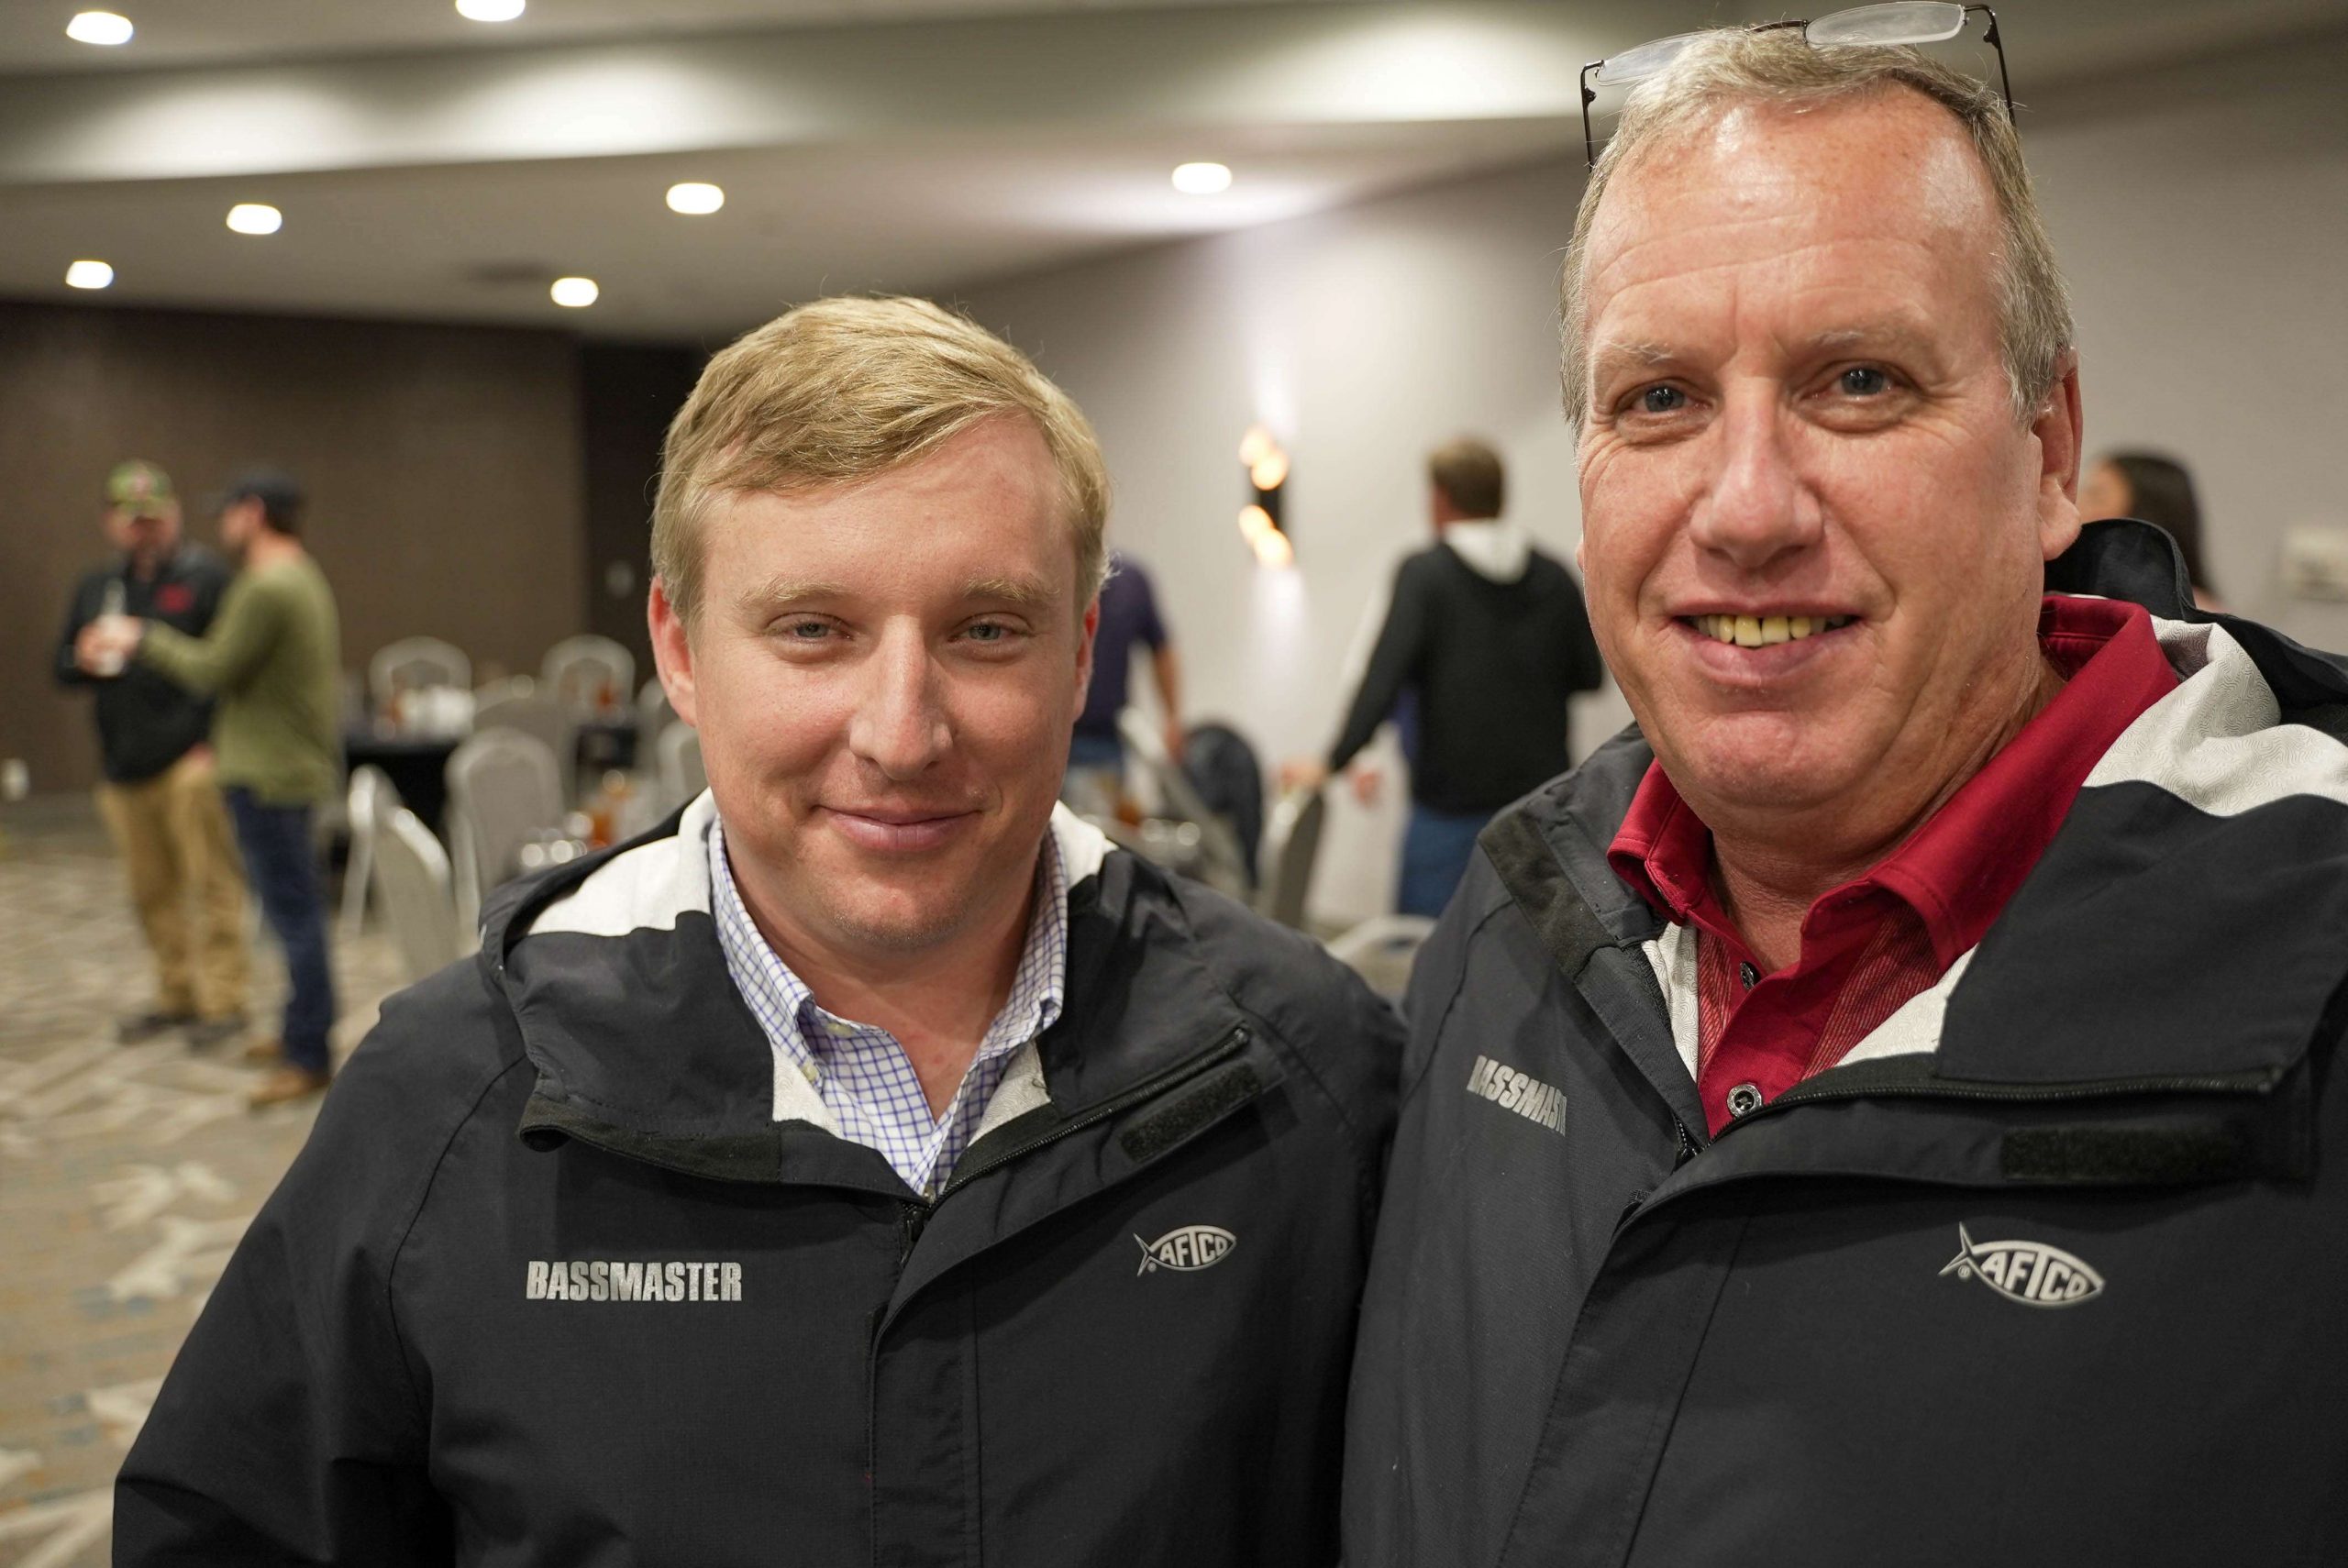 The new tournament director of the Bassmaster Opens, Hank Weldon and the new Vice President of Tournaments, Chris Bowes.